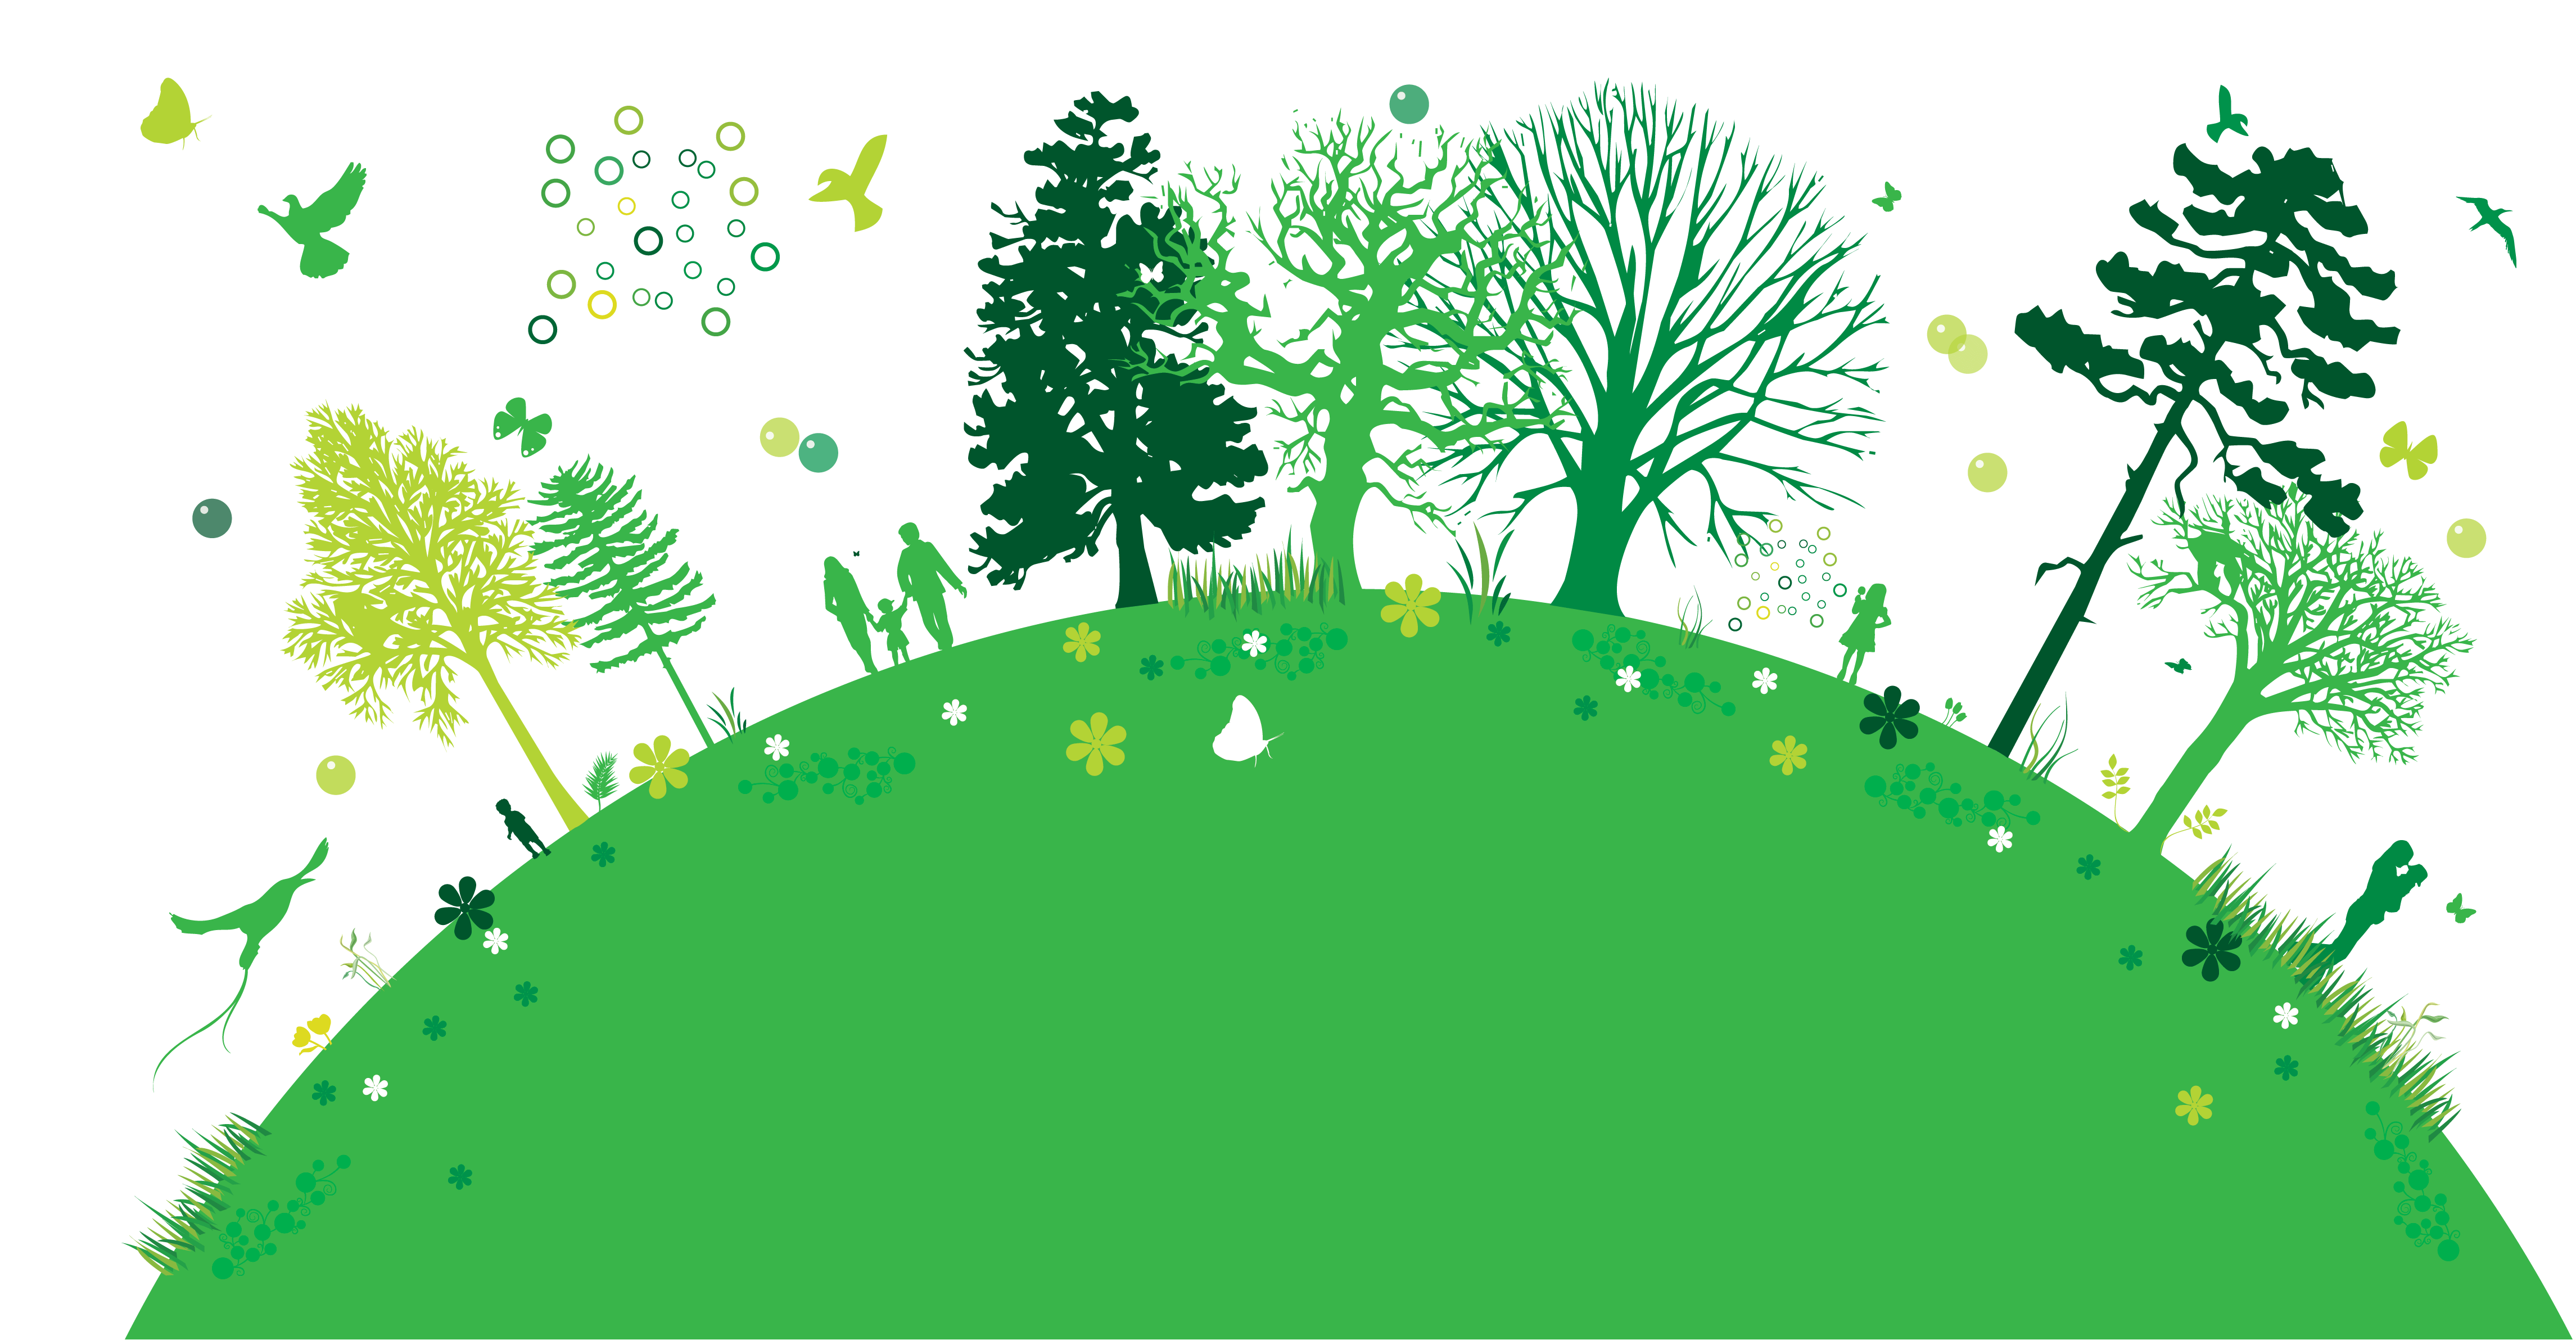 Environment clipart sustainable living, Environment sustainable living Transparent FREE for download on WebStockReview 2020